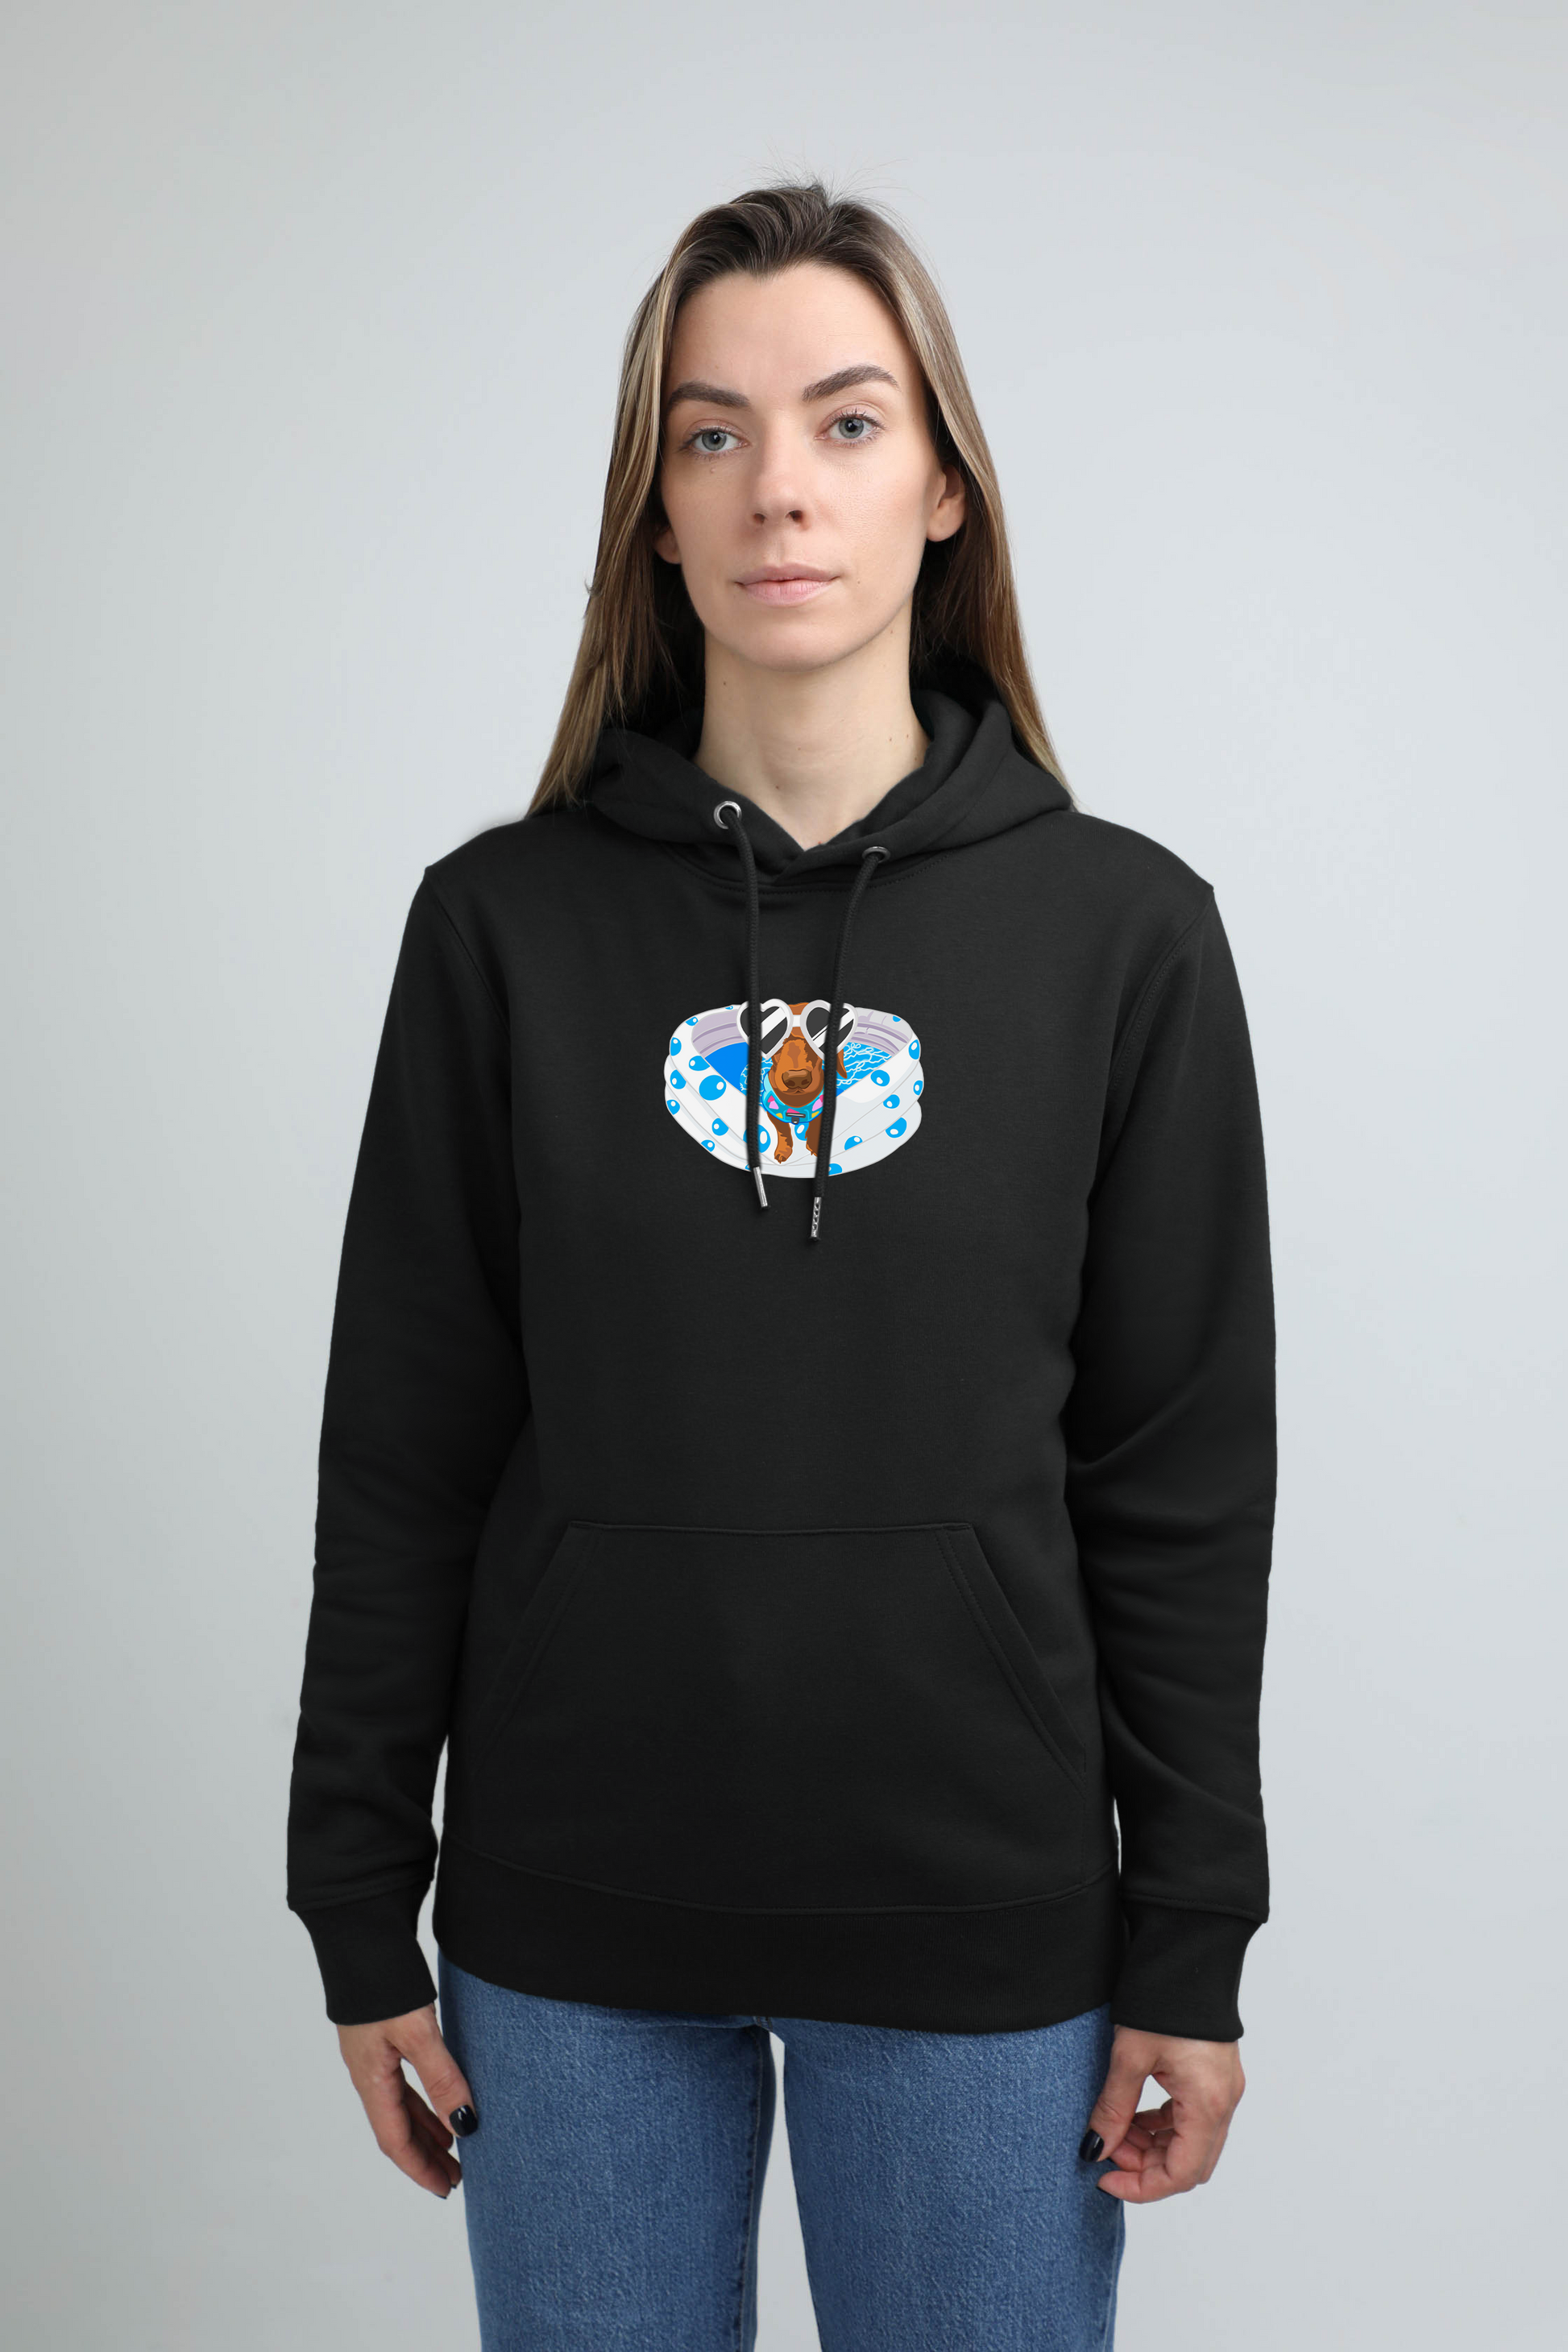 Poolparty dog | Hoodie with dog. Regular fit | Unisex by My Wild Other